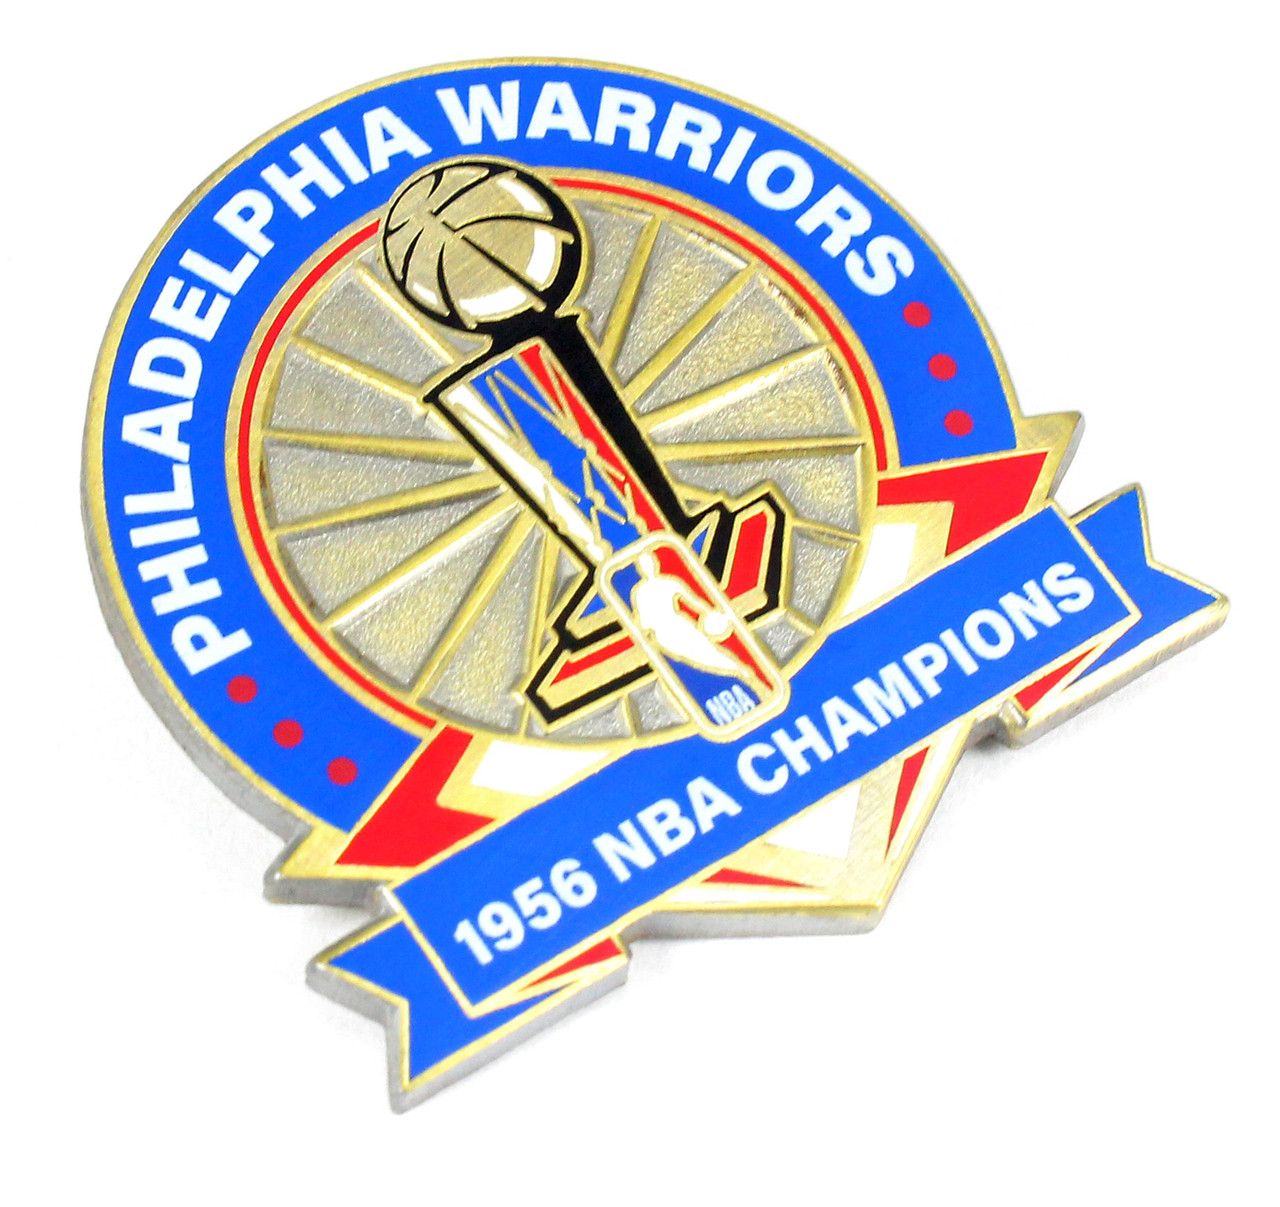 Pin on Wizards & Warriors